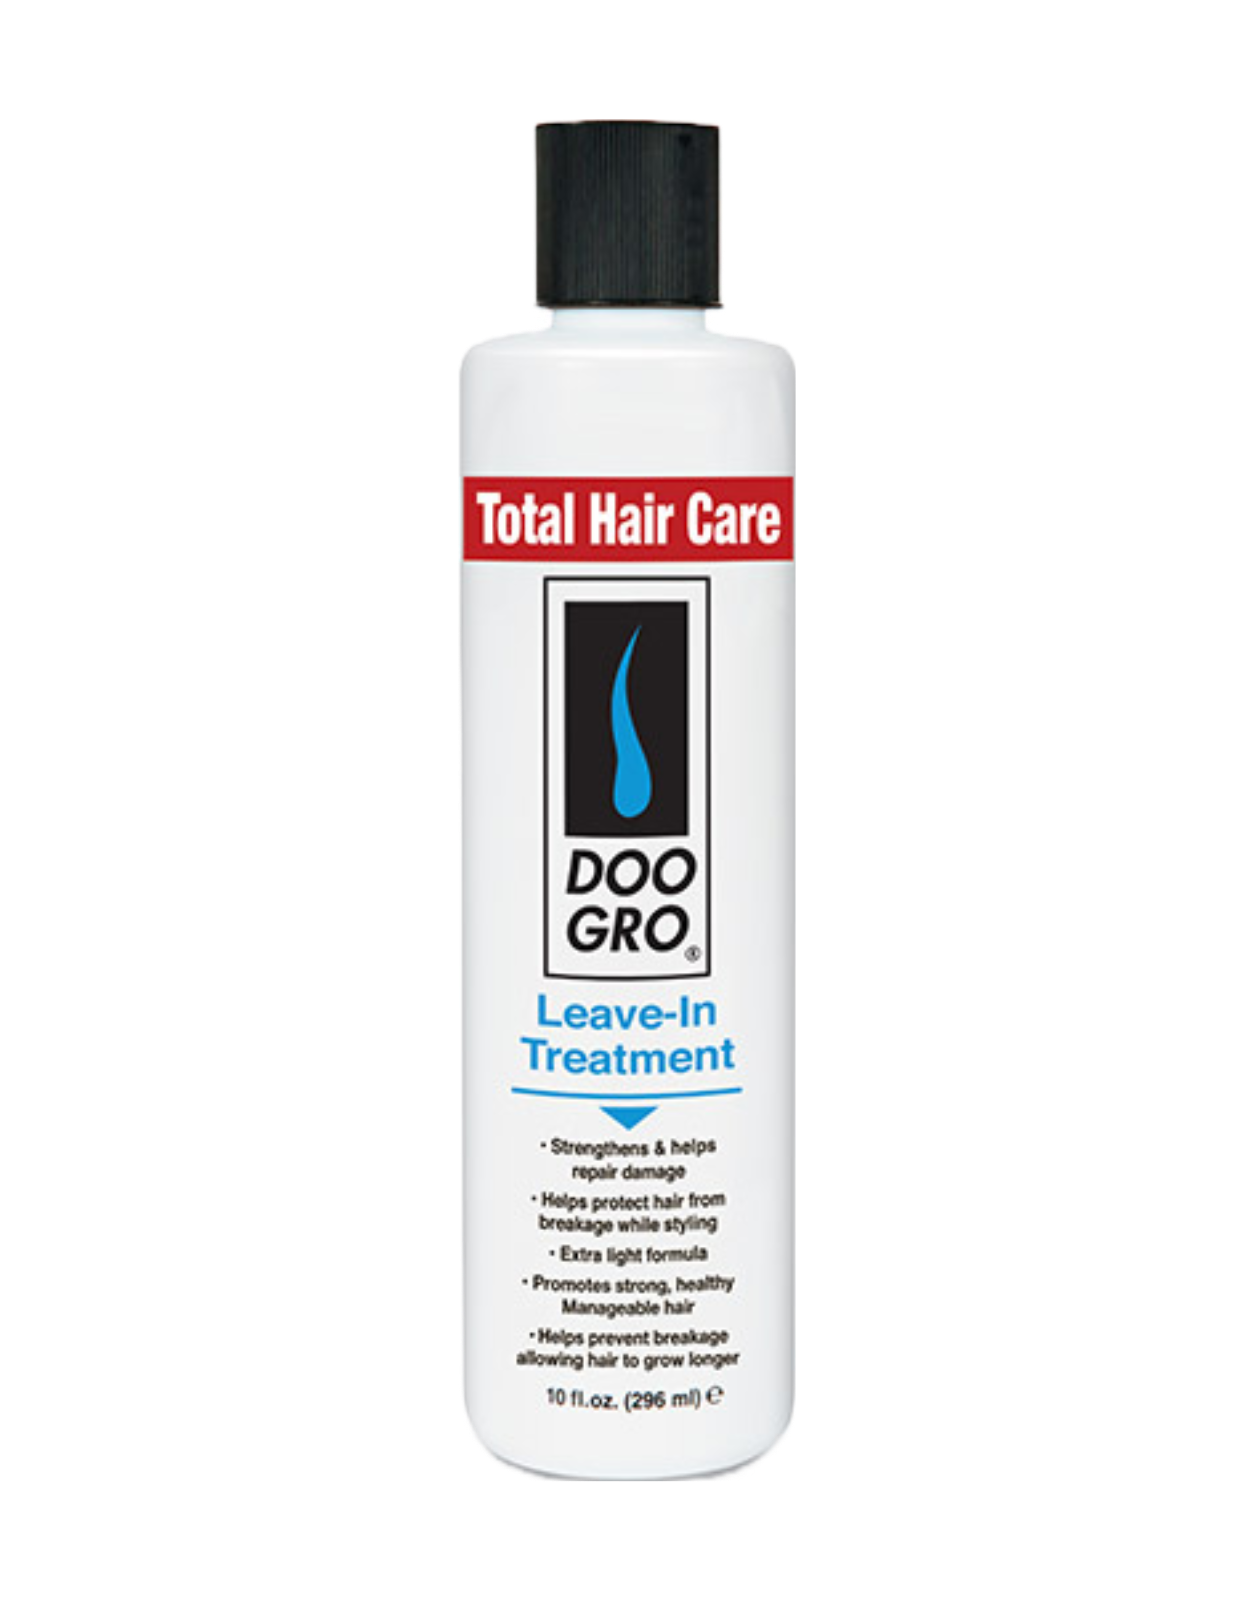 DOO GRO - Leave-In Treatment